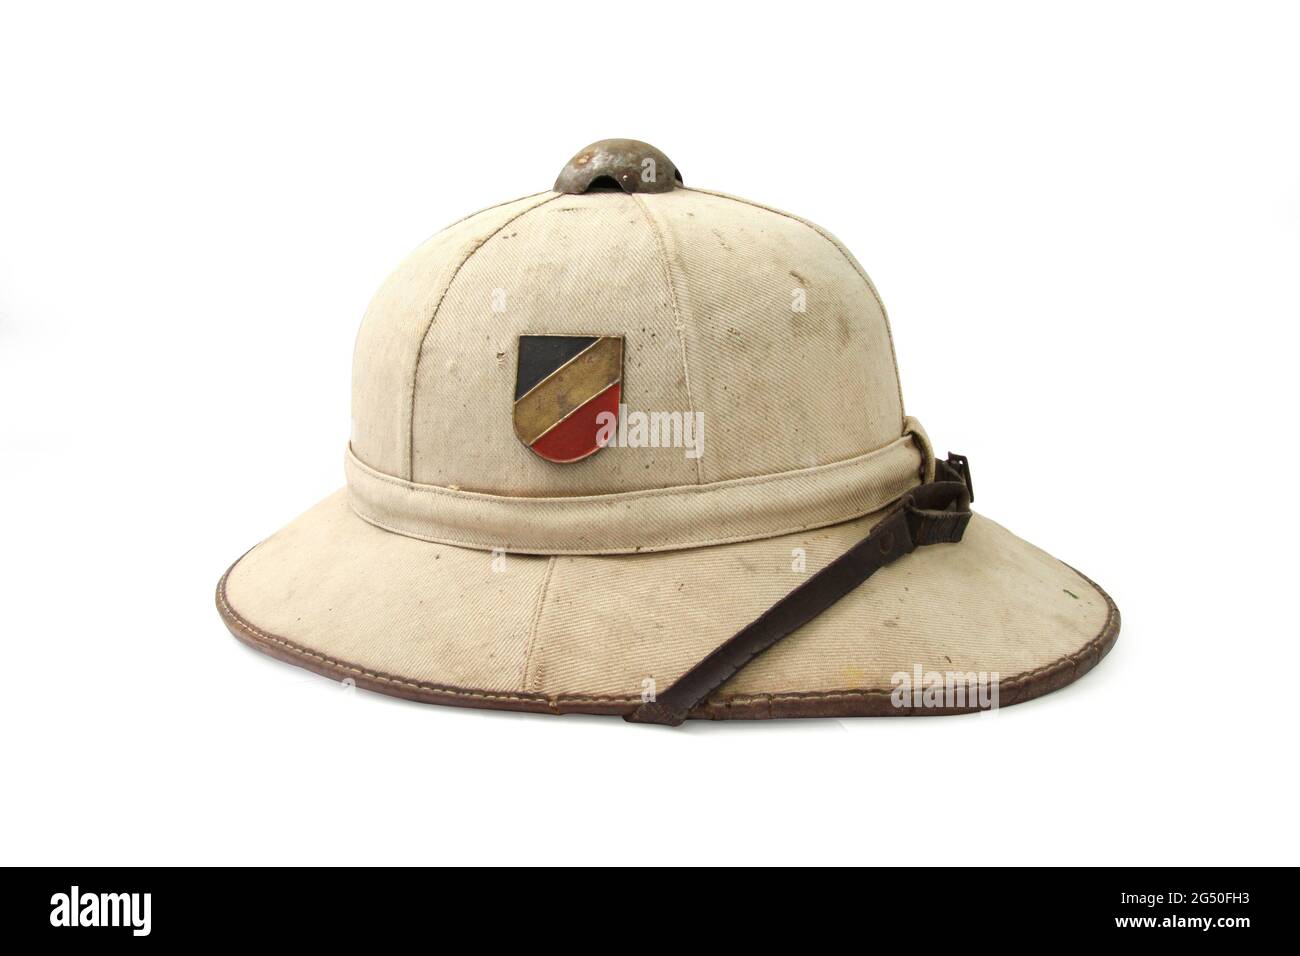 Germany at the World War II. German pith helmet of Afrika Korps with decals on isolated background. Stock Photo